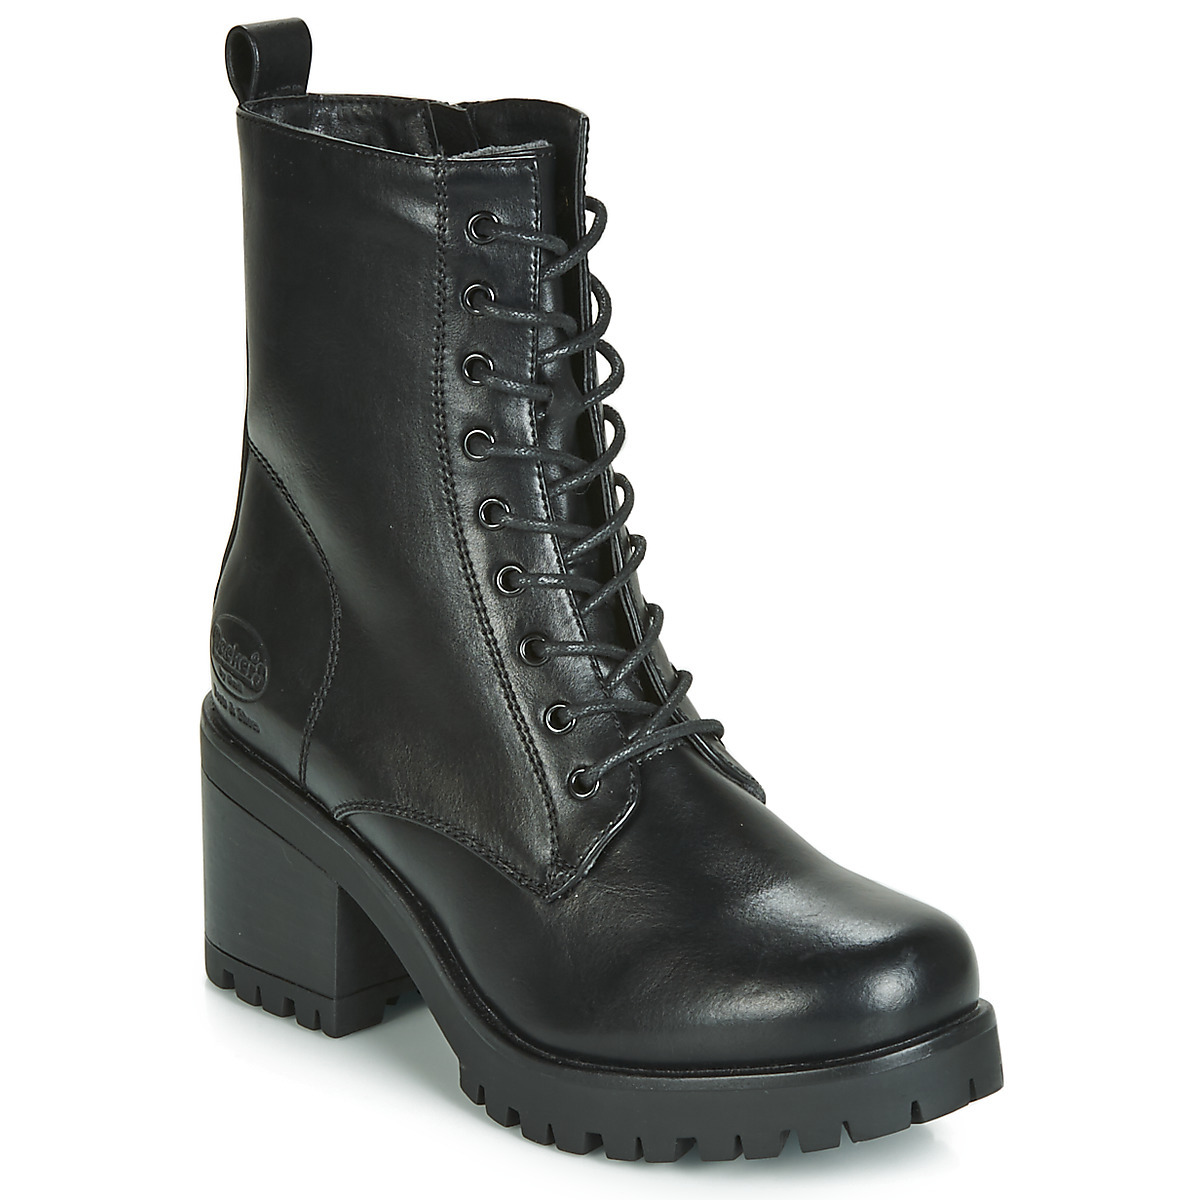 Spartoo - Women's Ankle Boots in Black by Dockers GOOFASH